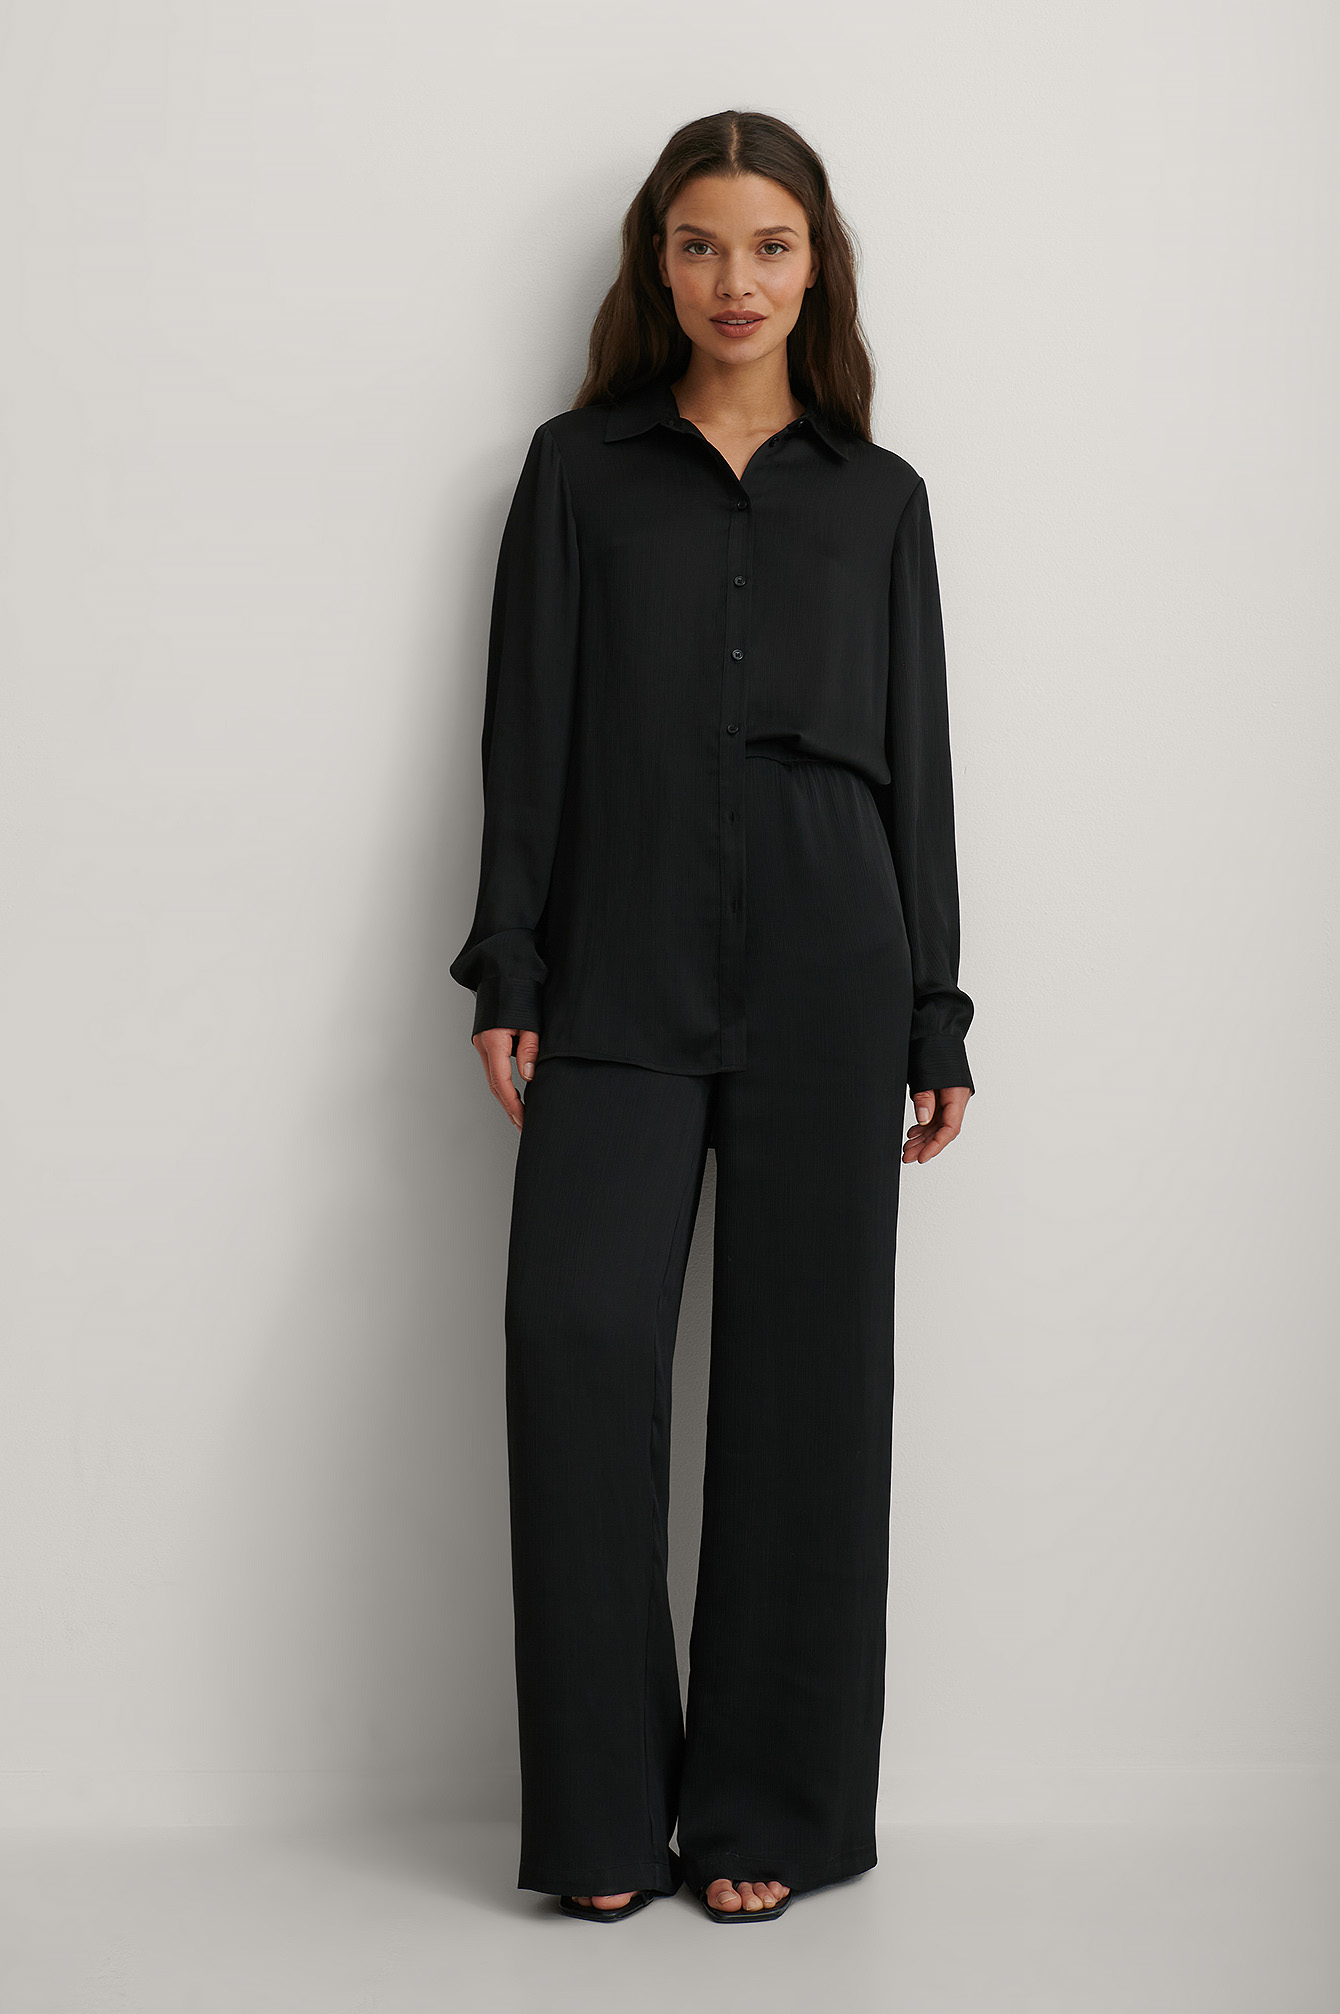 Structured Oversized Shirt and Structured Wide Leg Pants Outfit.